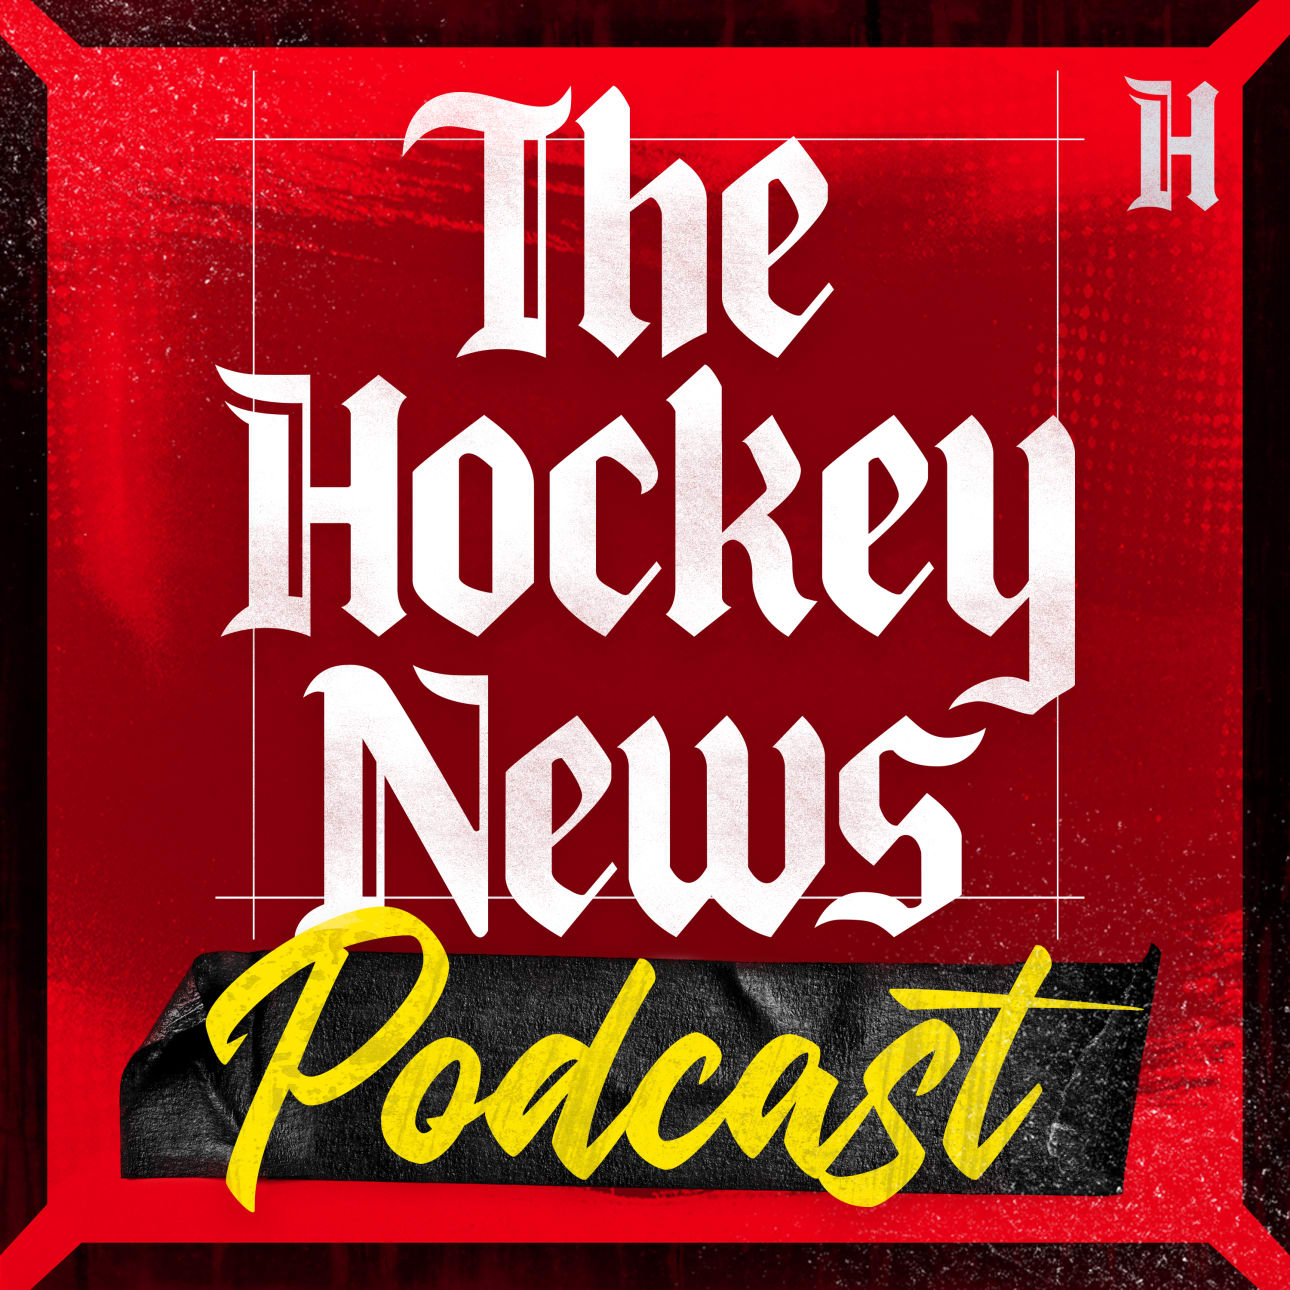 THN.com Blog: Is blue the new black? Let's hope so - The Hockey News